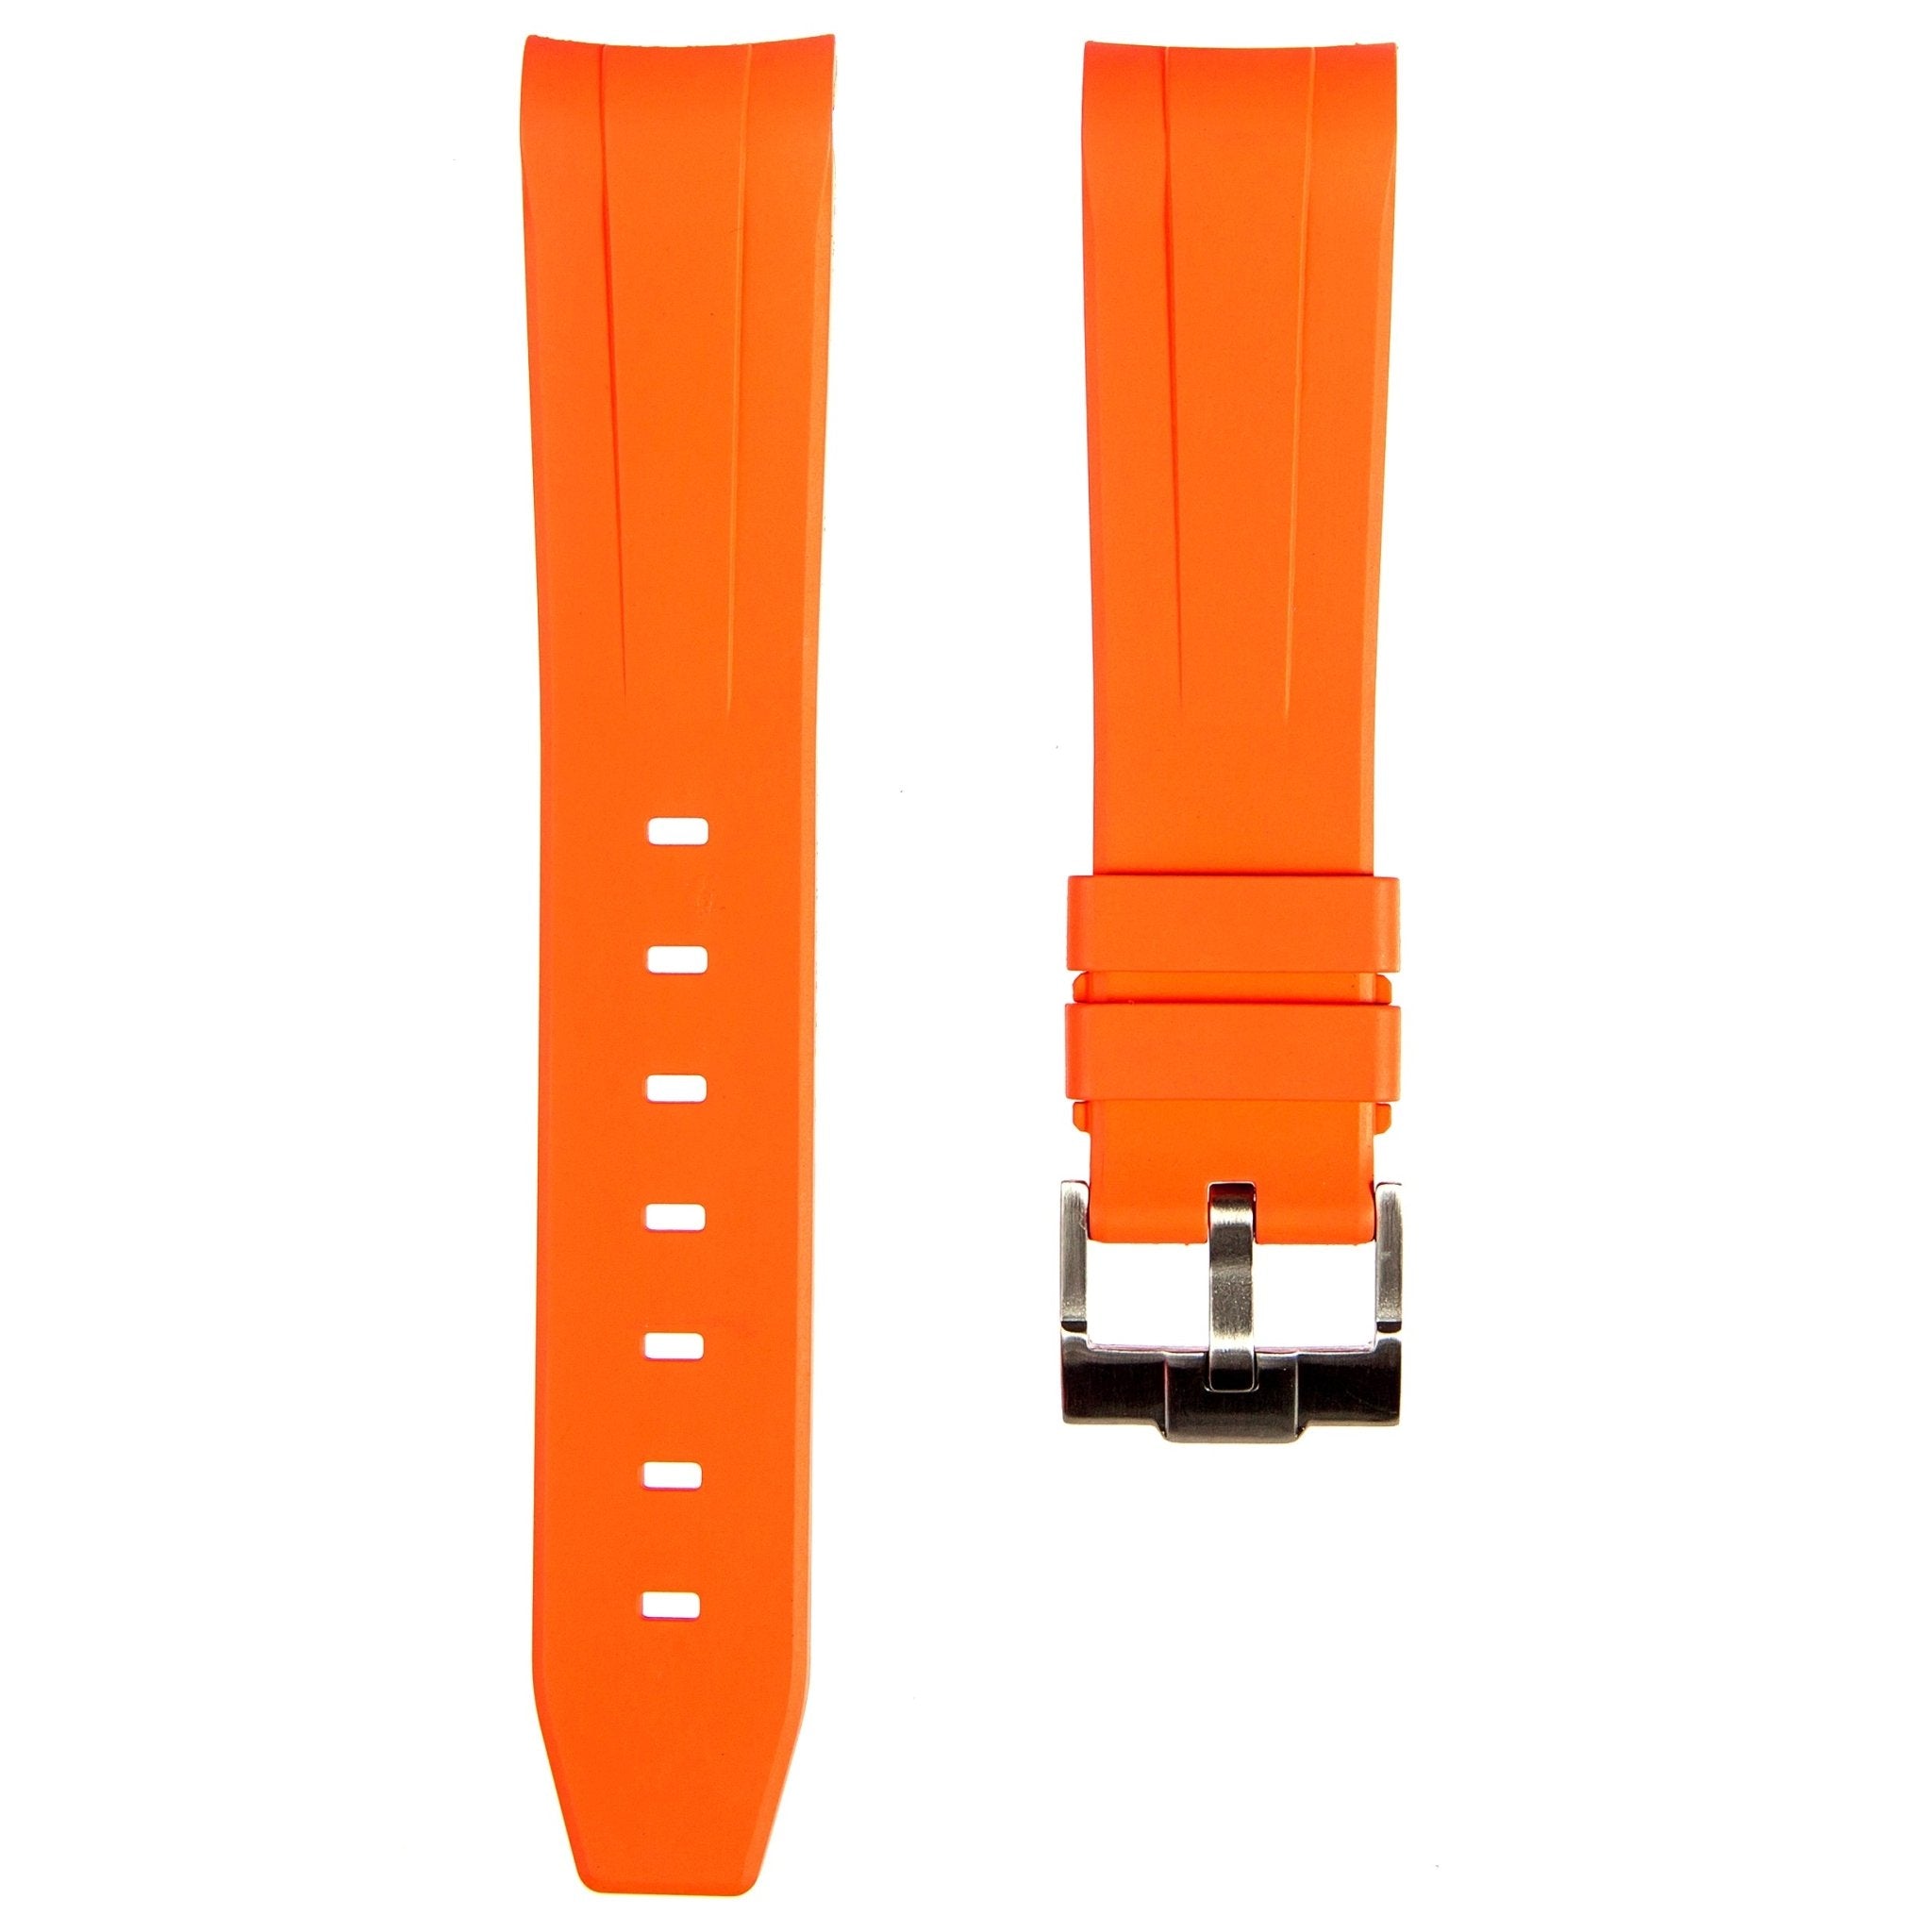 Forge Curved End FKM Rubber Strap – Compatible with Rolex Submariner – Orange (2421) -Strapseeker